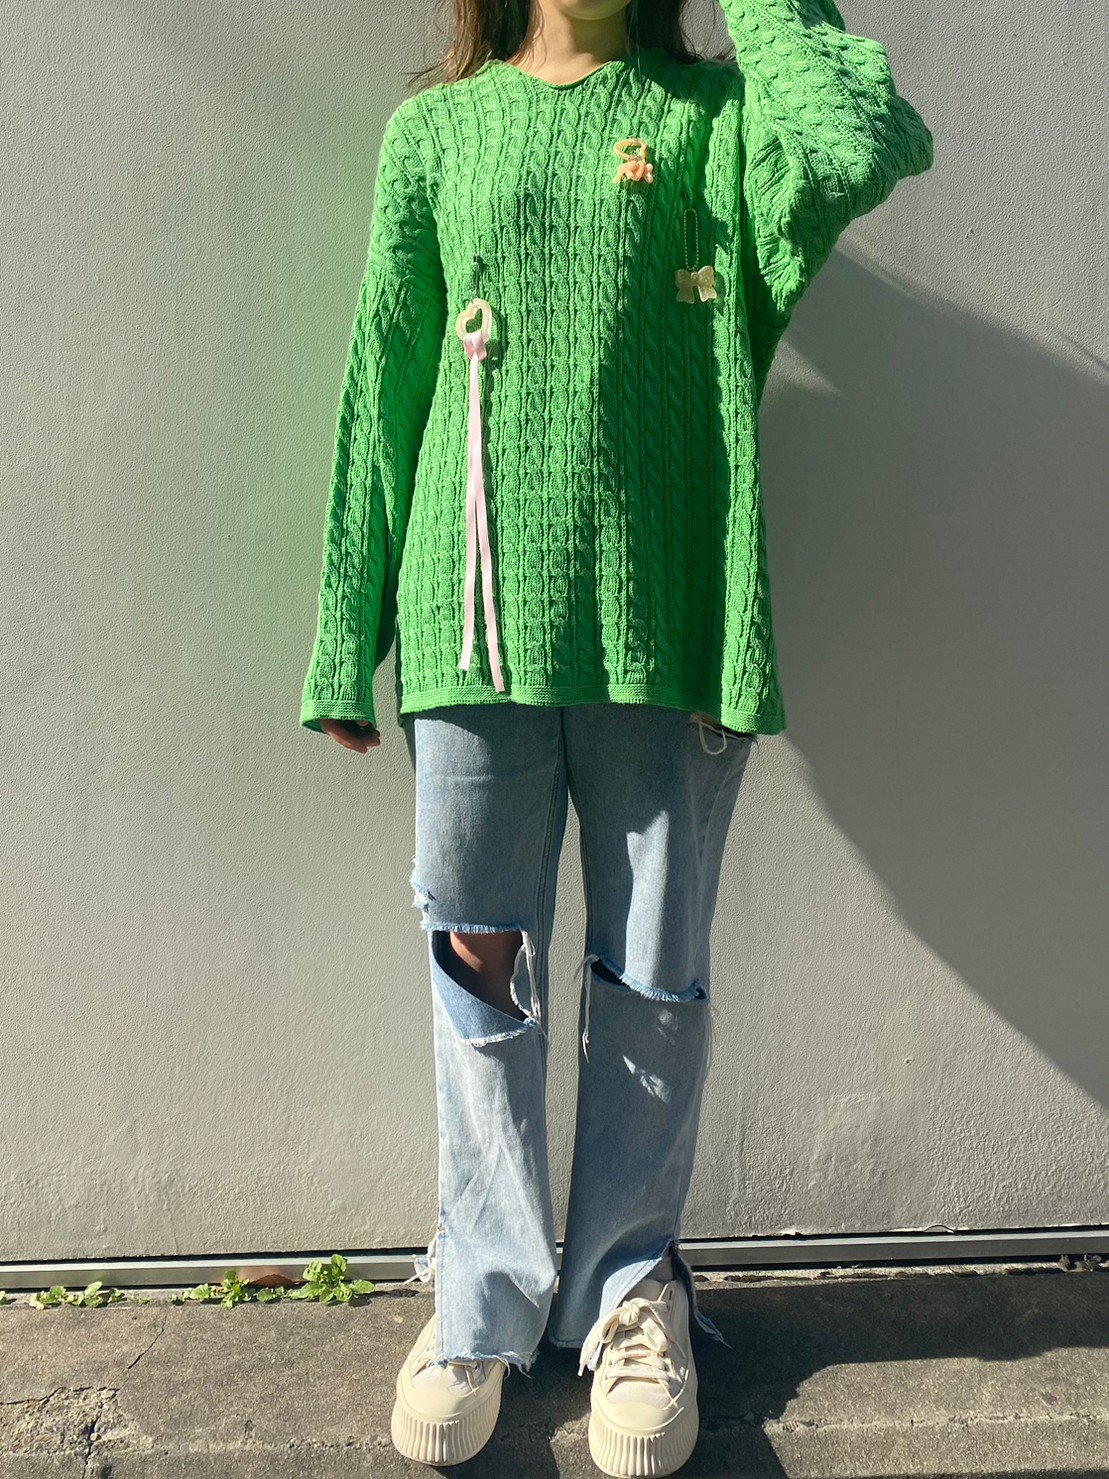 <img class='new_mark_img1' src='https://img.shop-pro.jp/img/new/icons20.gif' style='border:none;display:inline;margin:0px;padding:0px;width:auto;' />《SALE》green knit tops